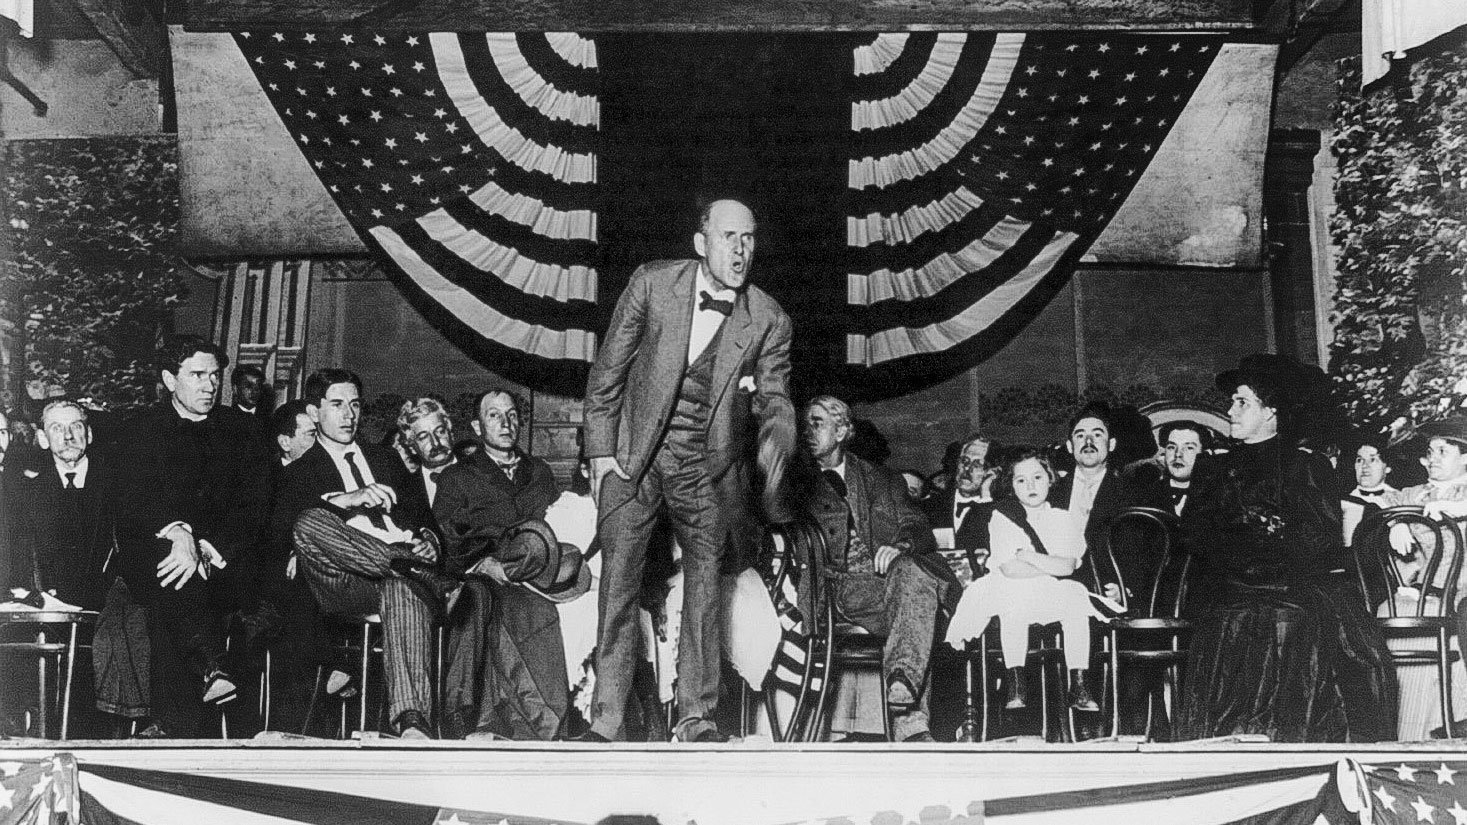 Eugene Debs giving a speech on a stage